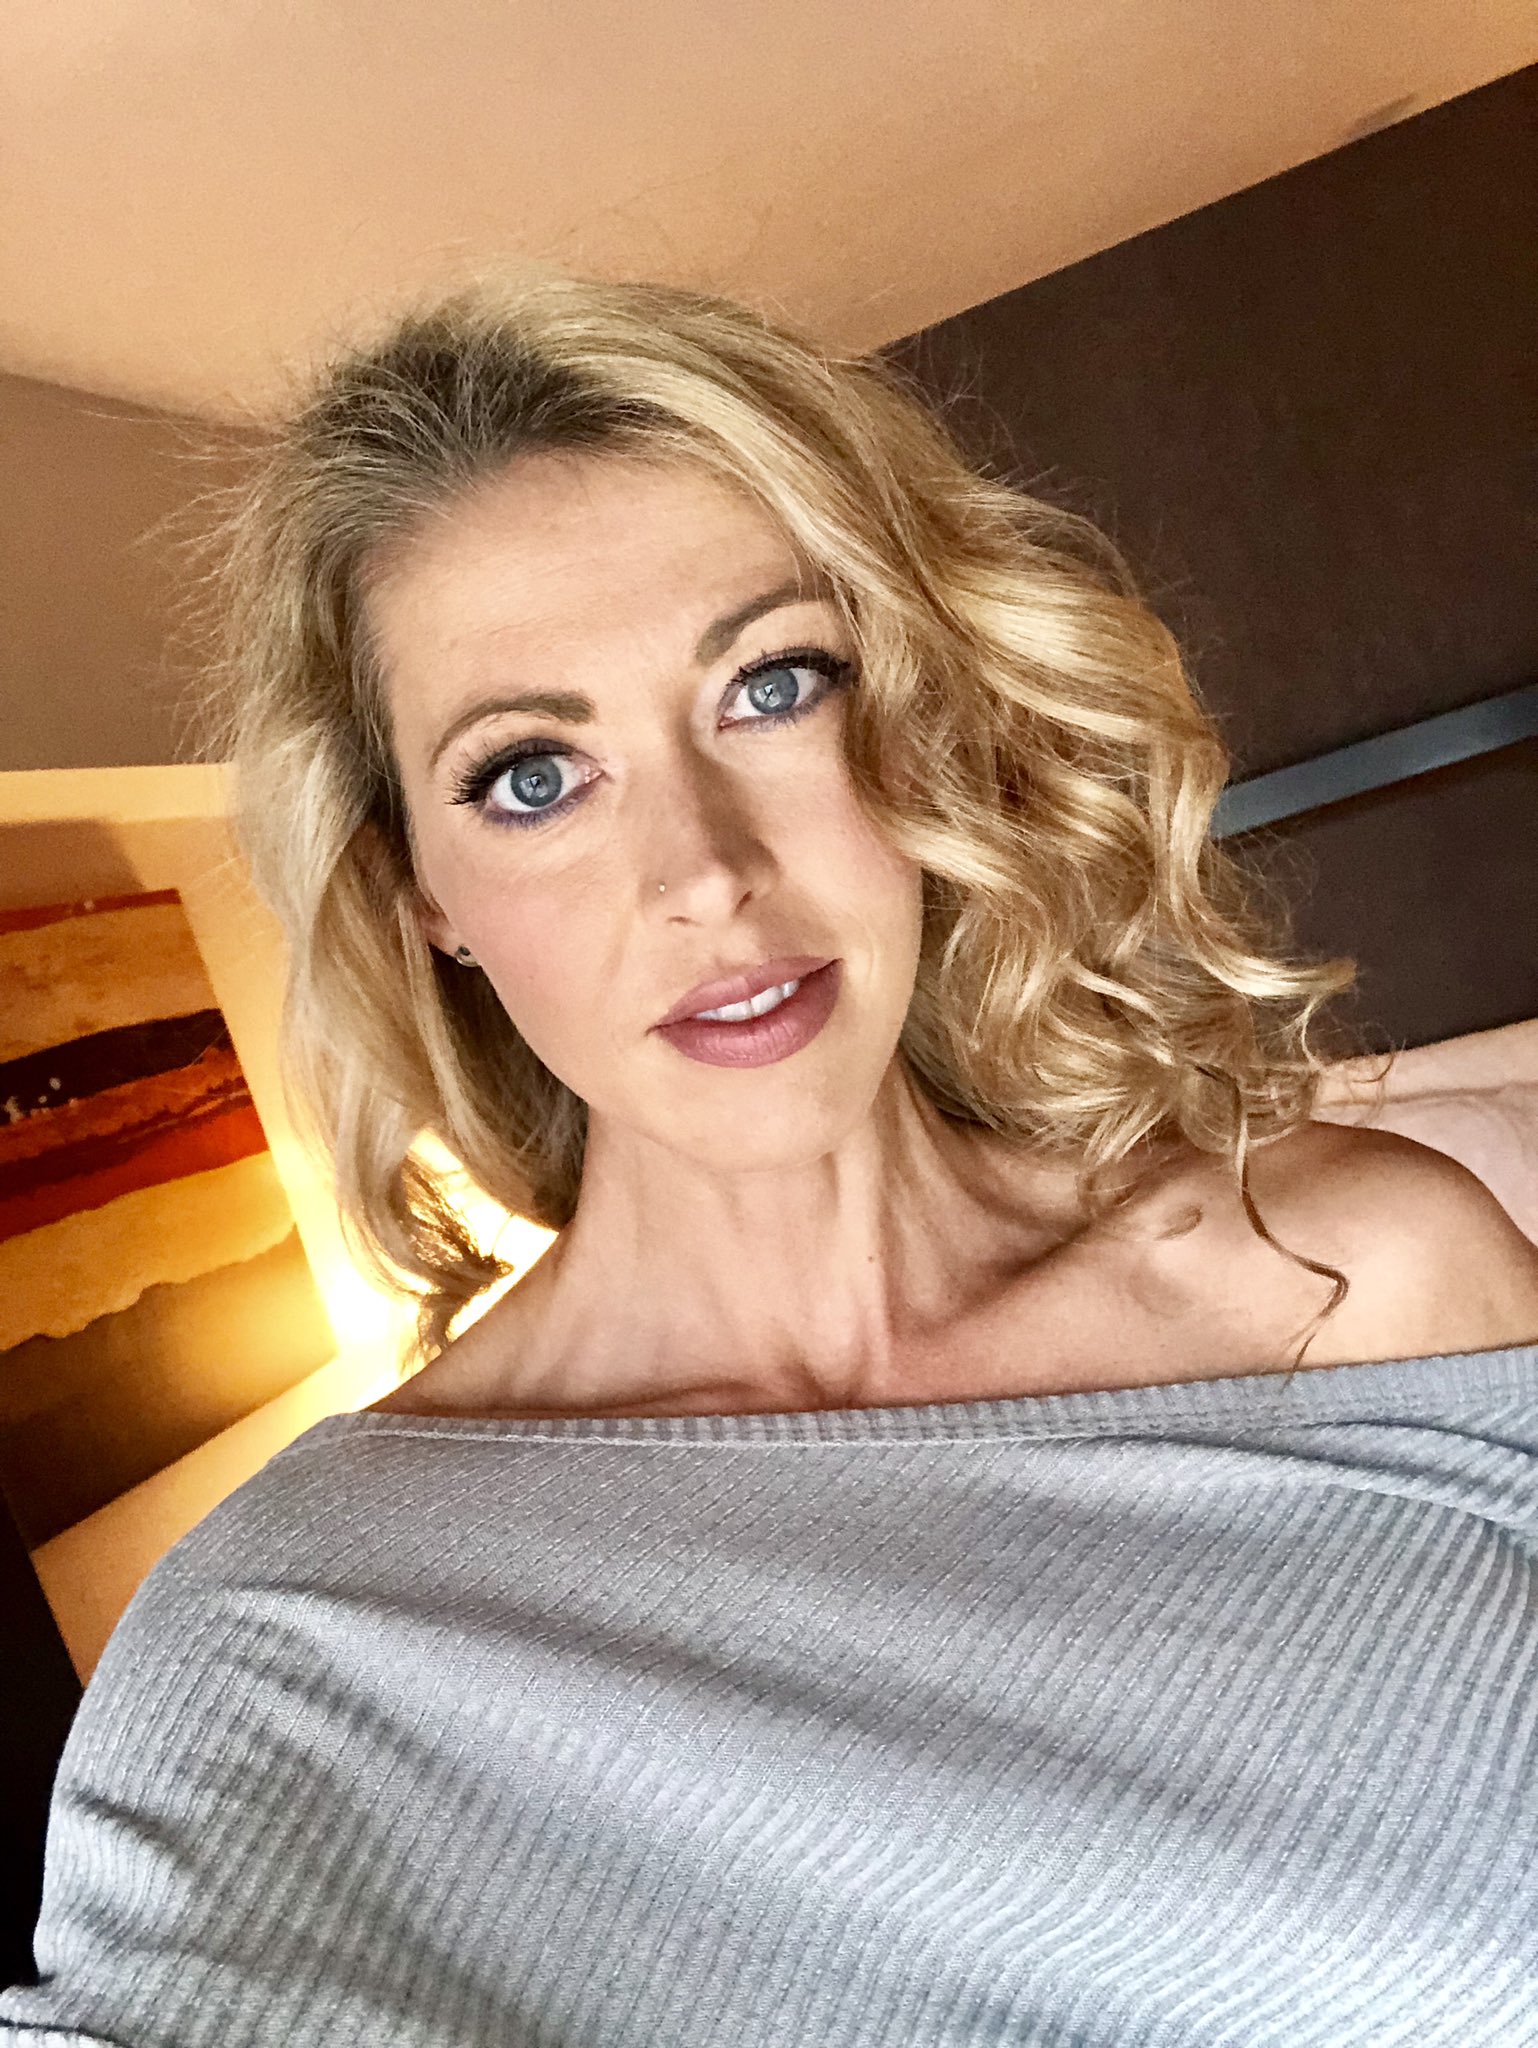 Holly Hotwife Top 0.06% - Hotwife Tour Dallas Sept on Twitte